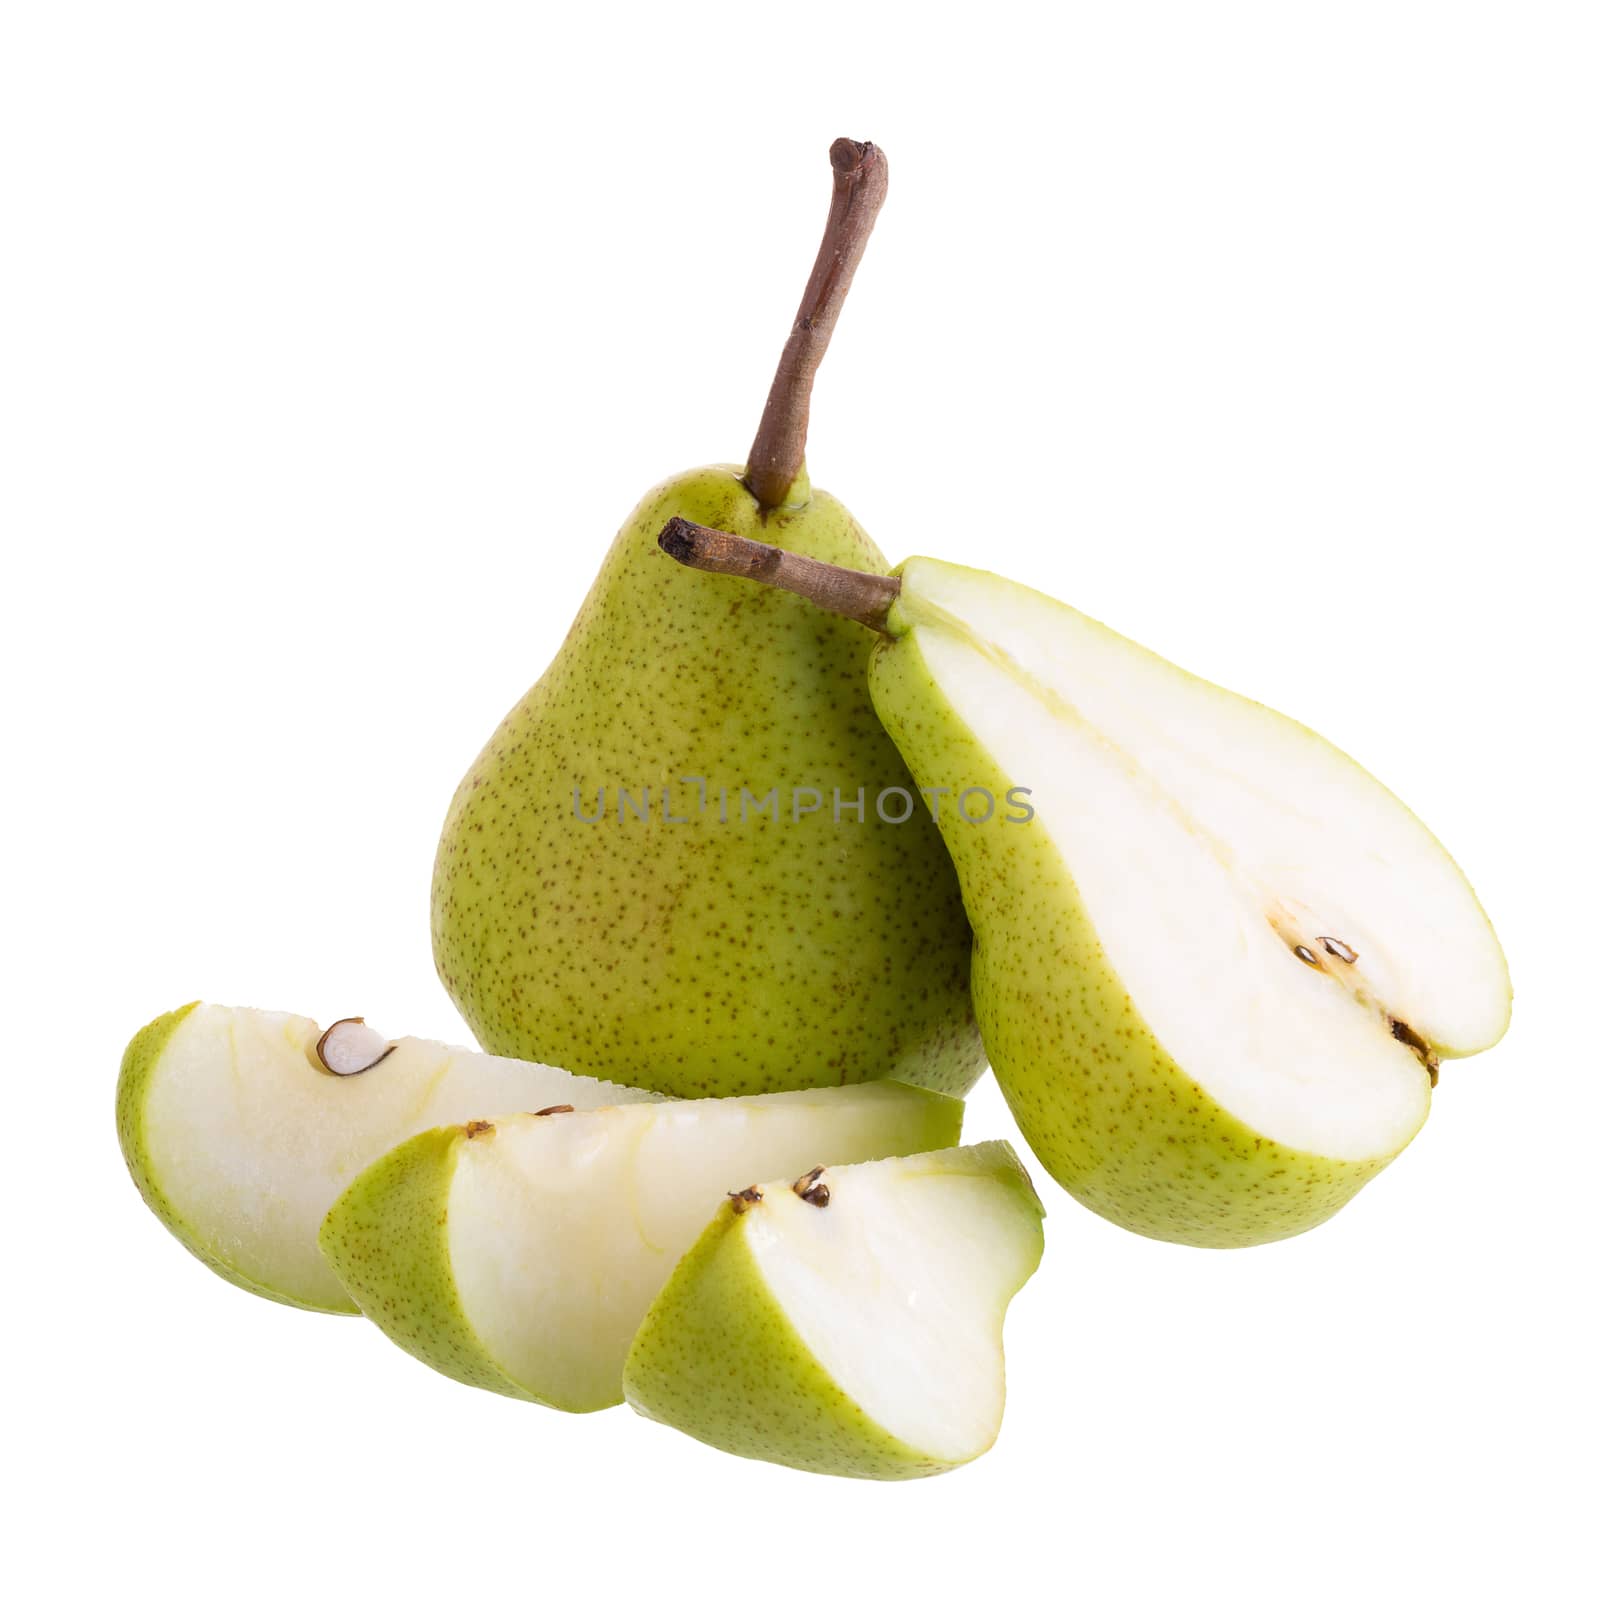 Ripe green pears with half and slice isolated on a white background.